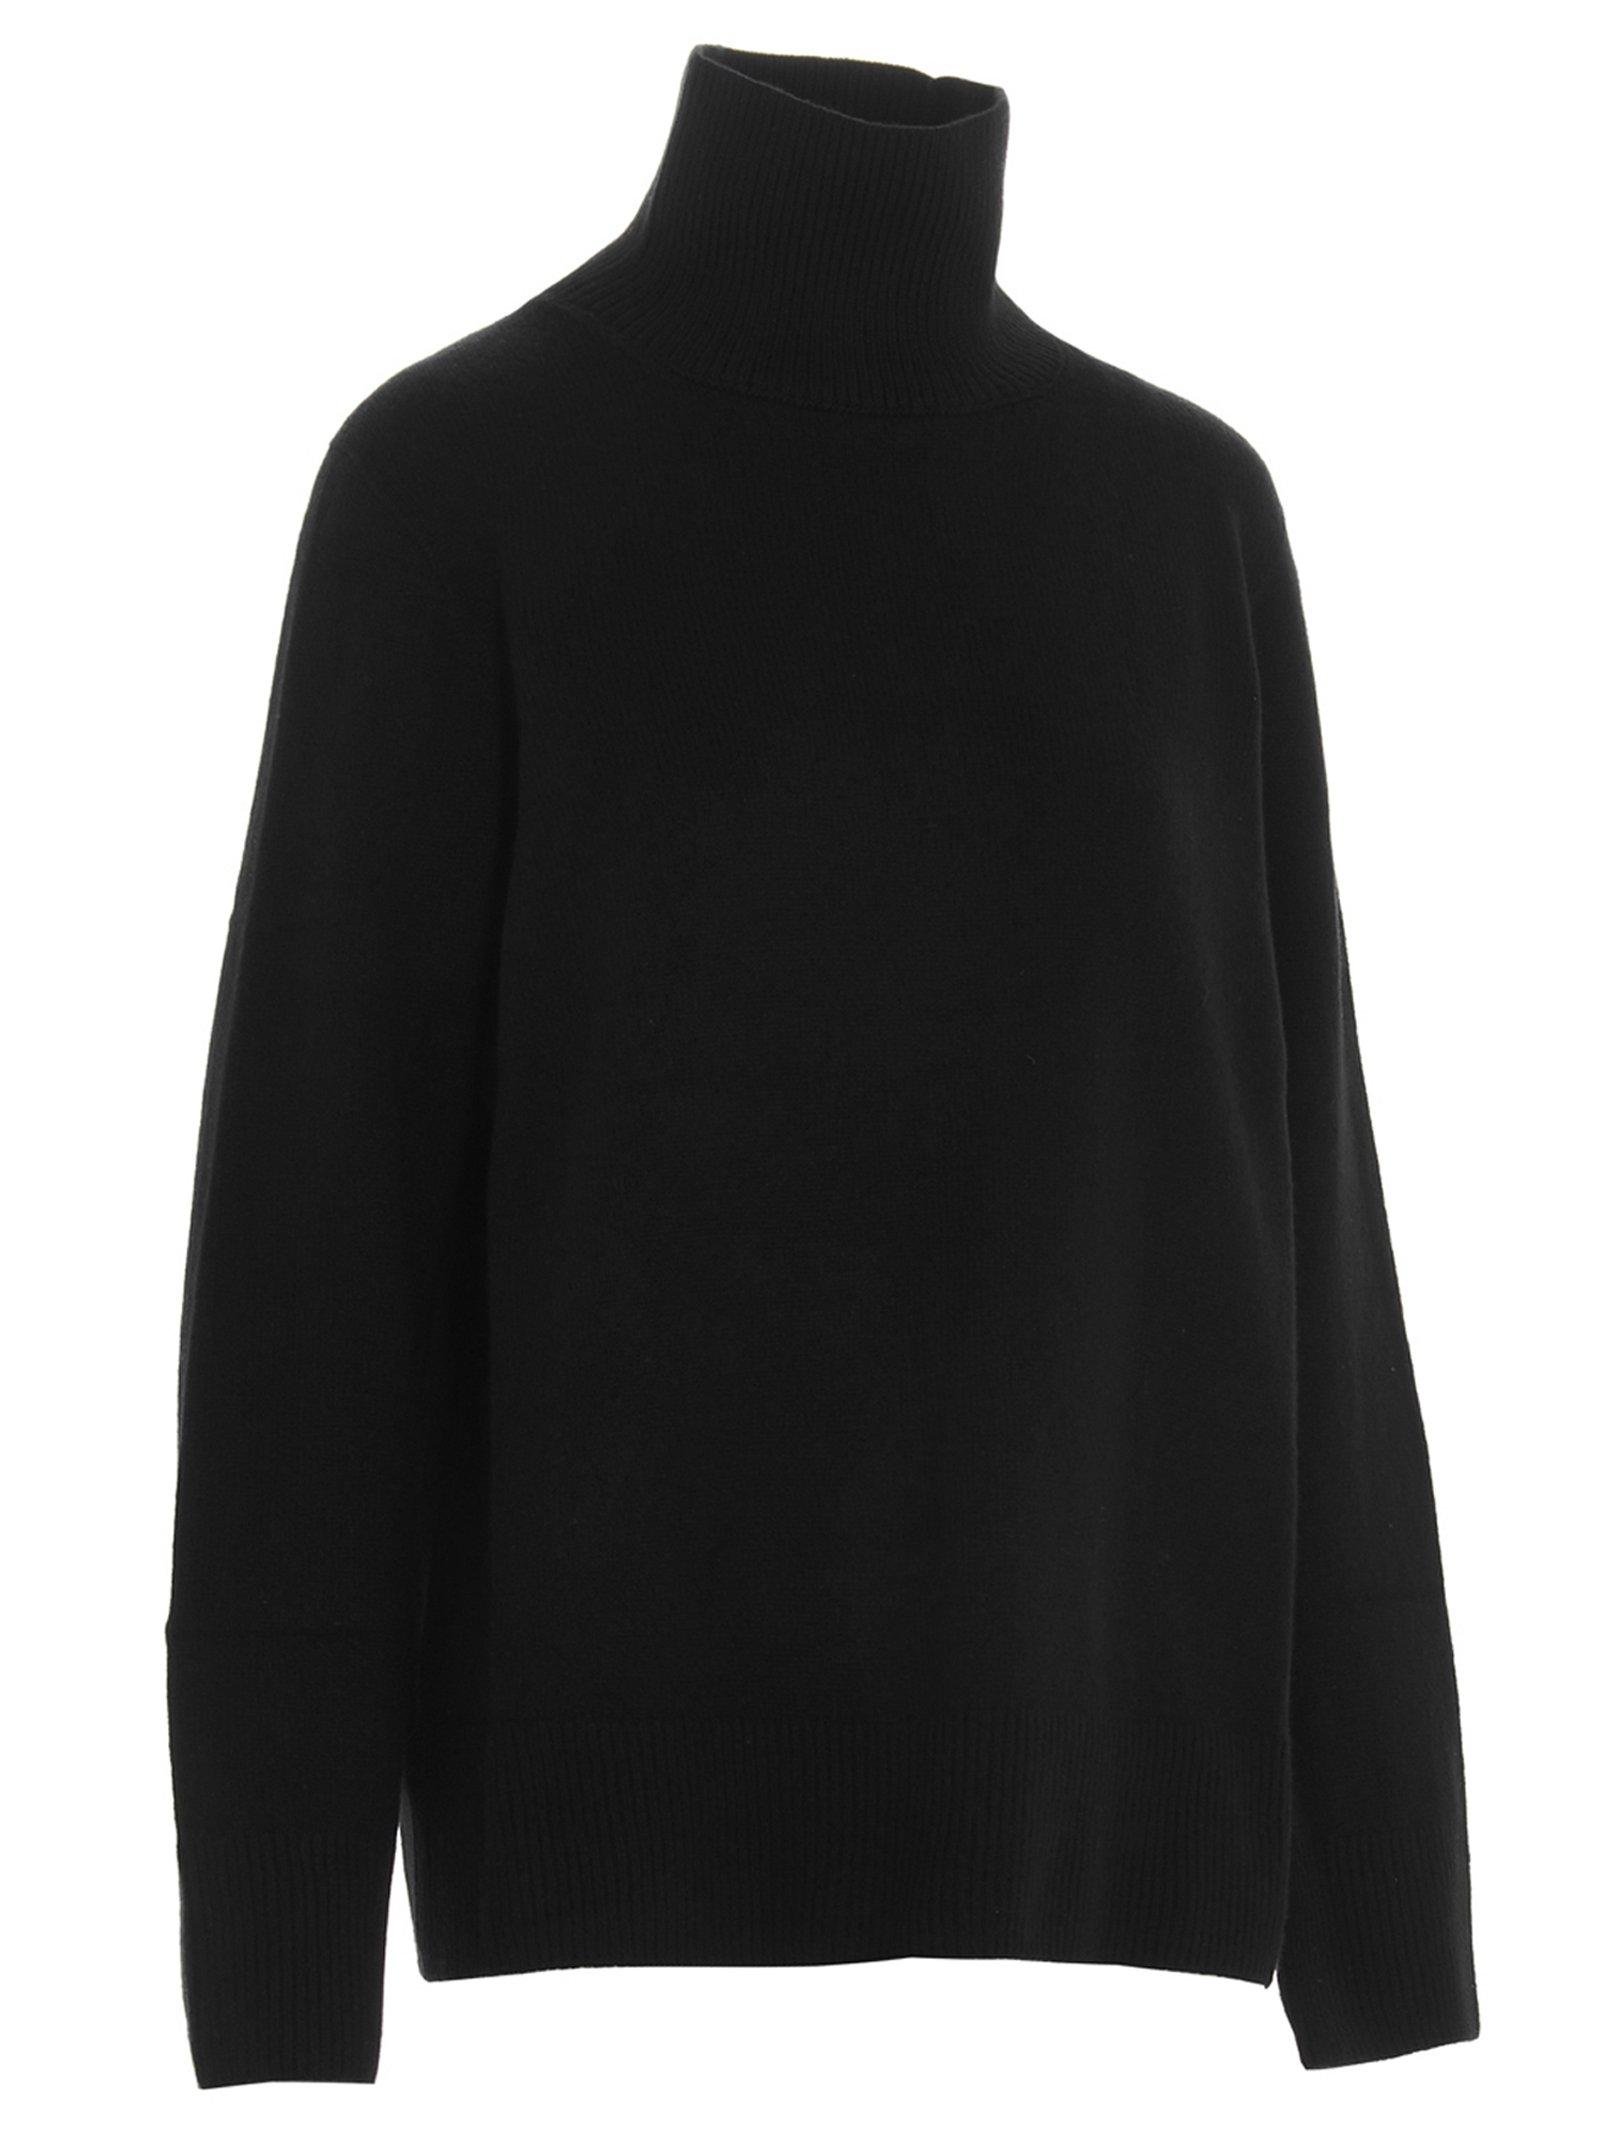 The Row Wool Milina Turtleneck Sweater in Black - Lyst